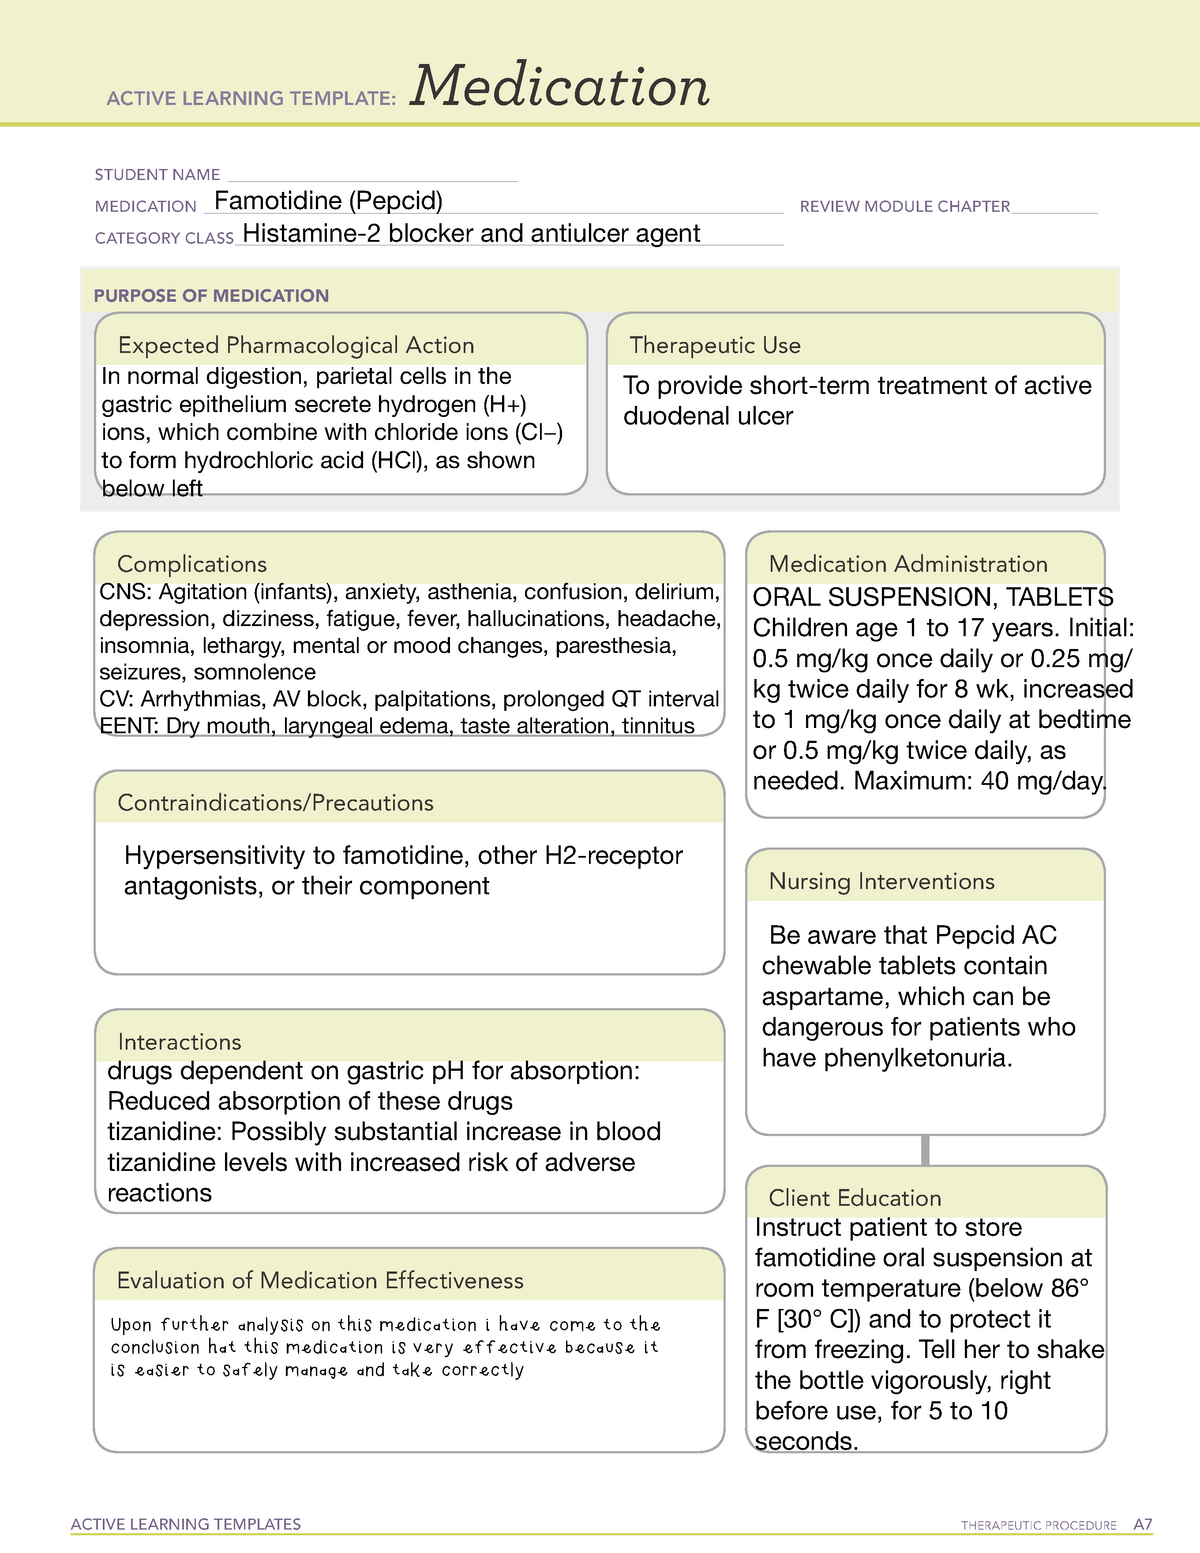 Famotidine (Pepcid) Med Map ACTIVE LEARNING TEMPLATES THERAPEUTIC